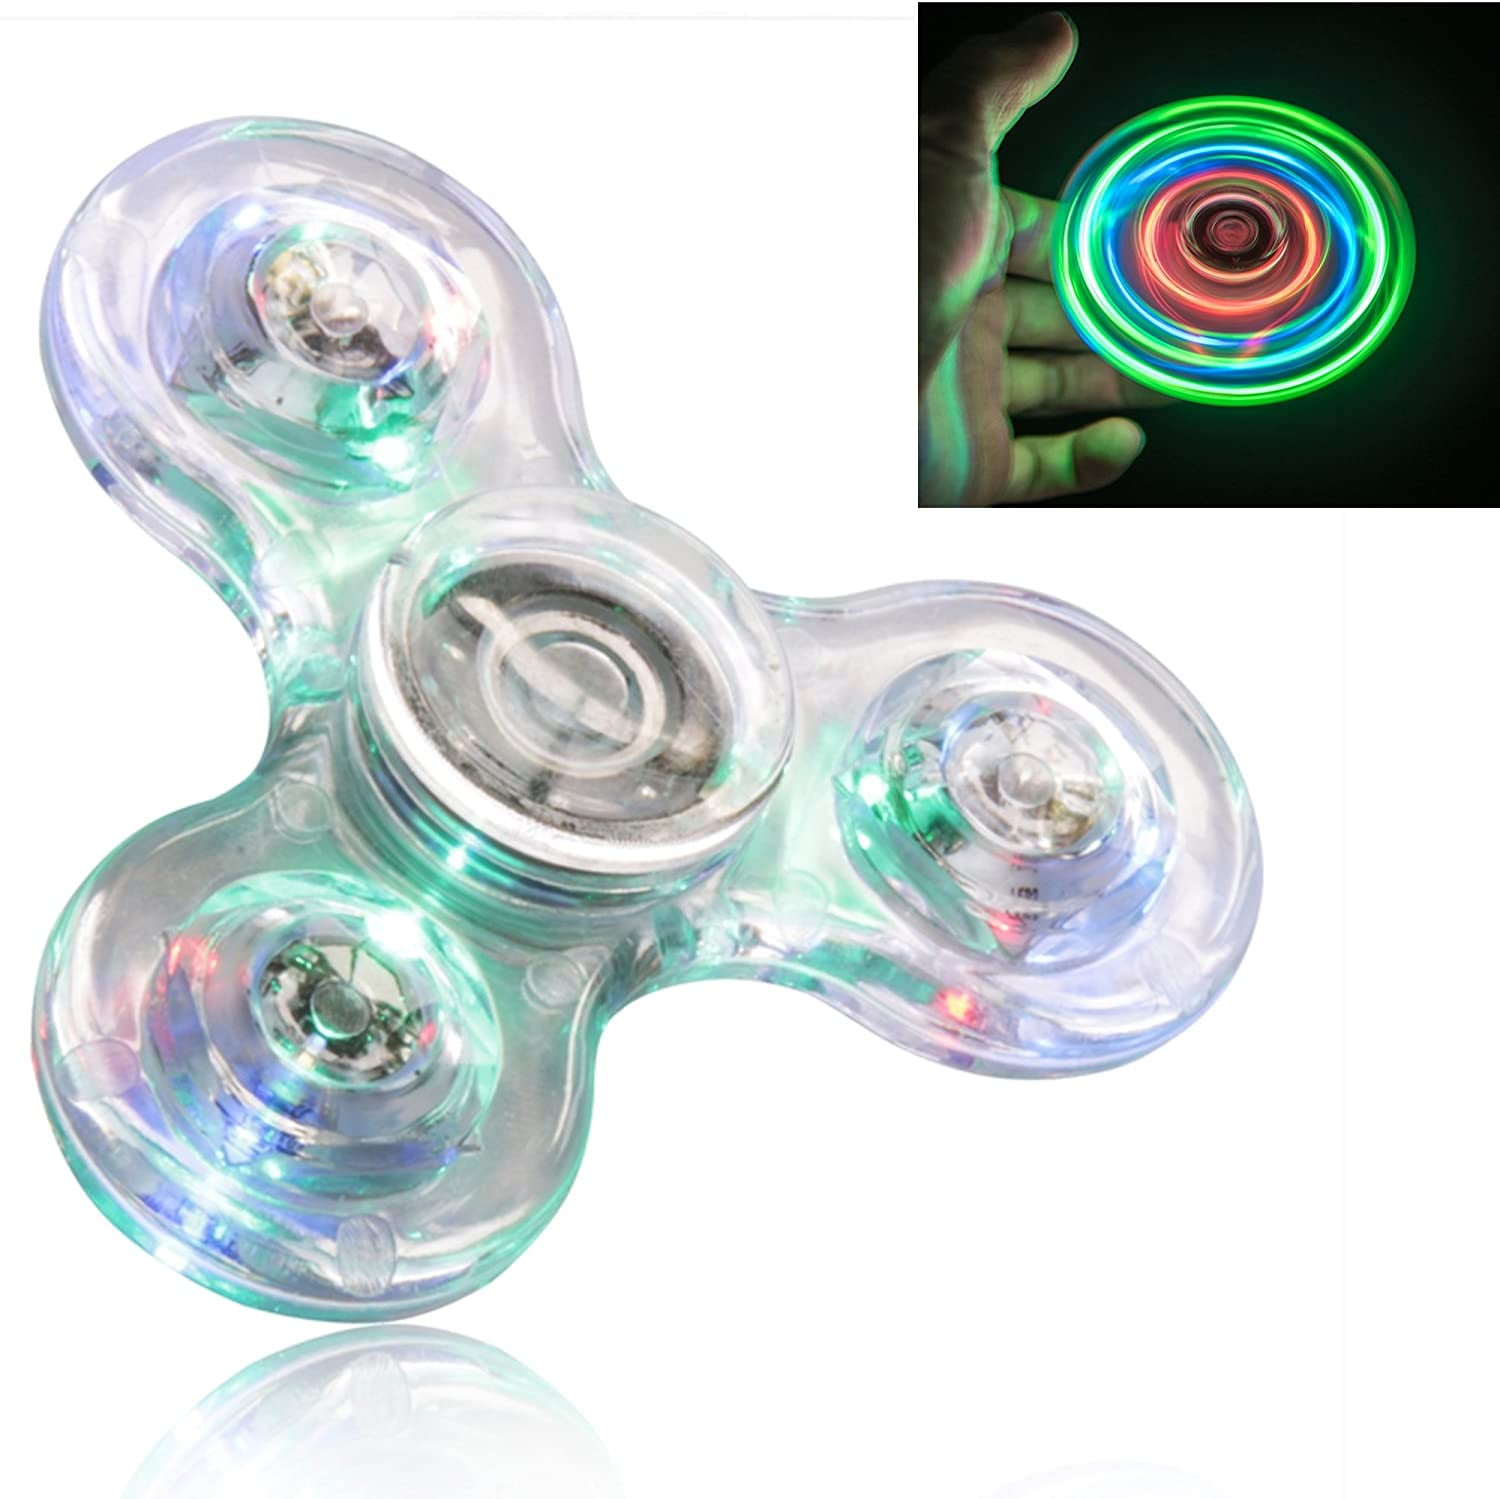 2 Pack LED Light up Fidget Spinners Fidget Toys Finger Spinners with 32 patterns 